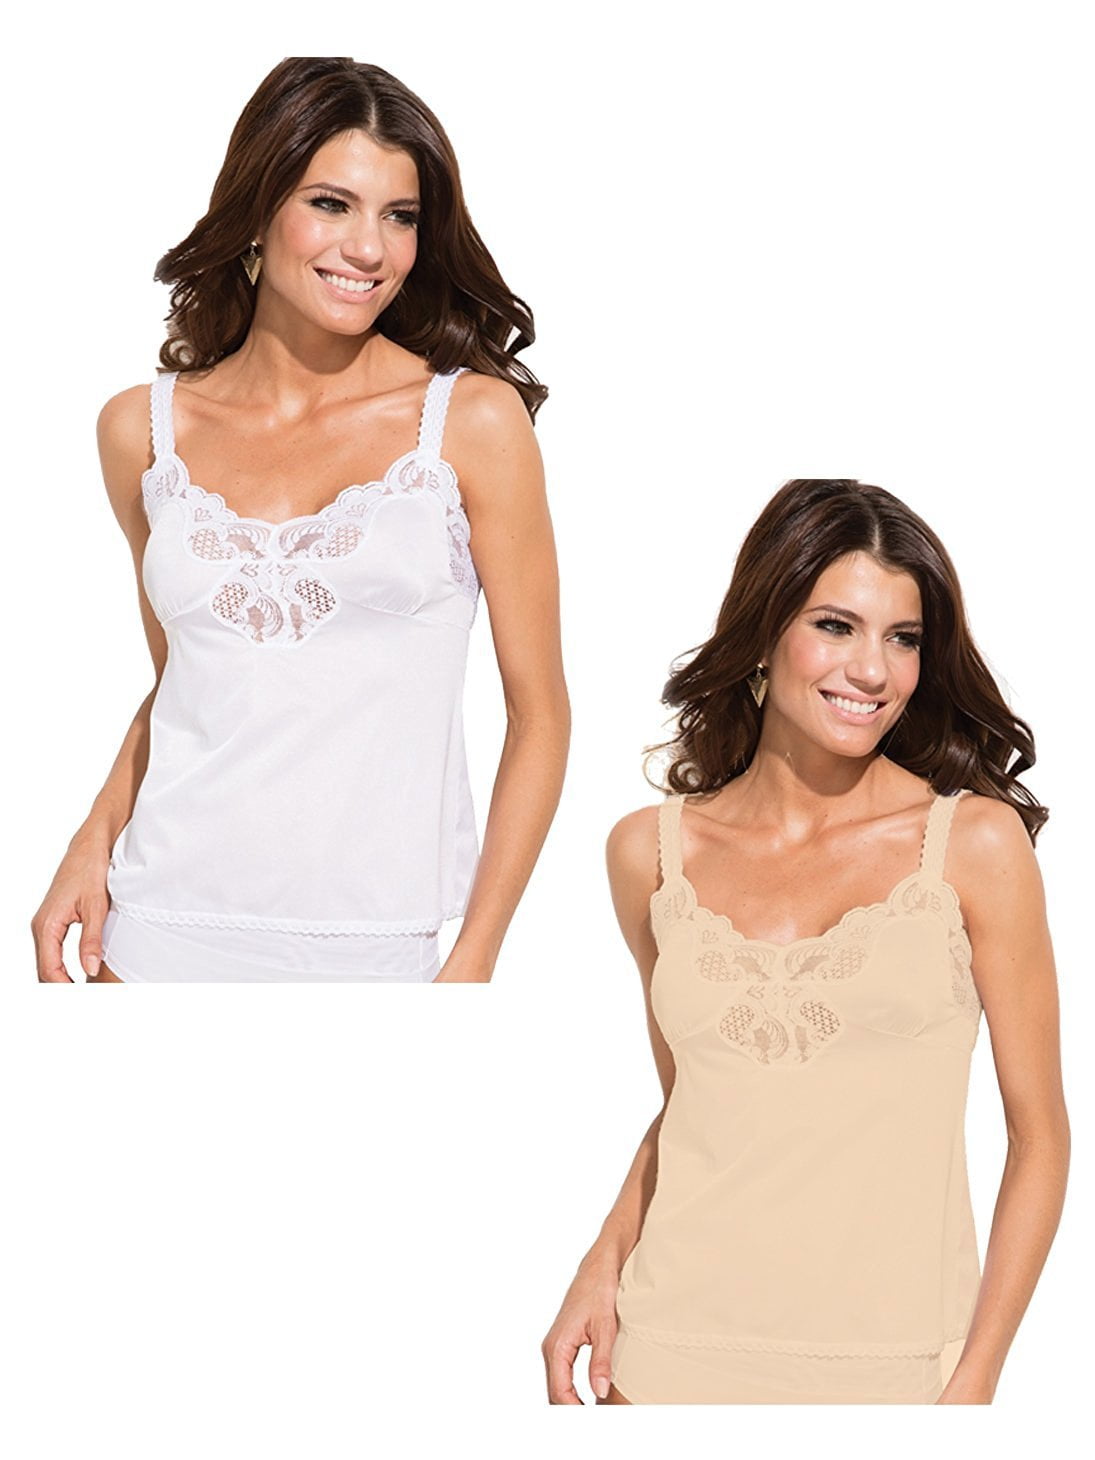 Seamless Meant to be Seen Slimming V-Neck Camisole with Lace Trim by Body Beautiful. 